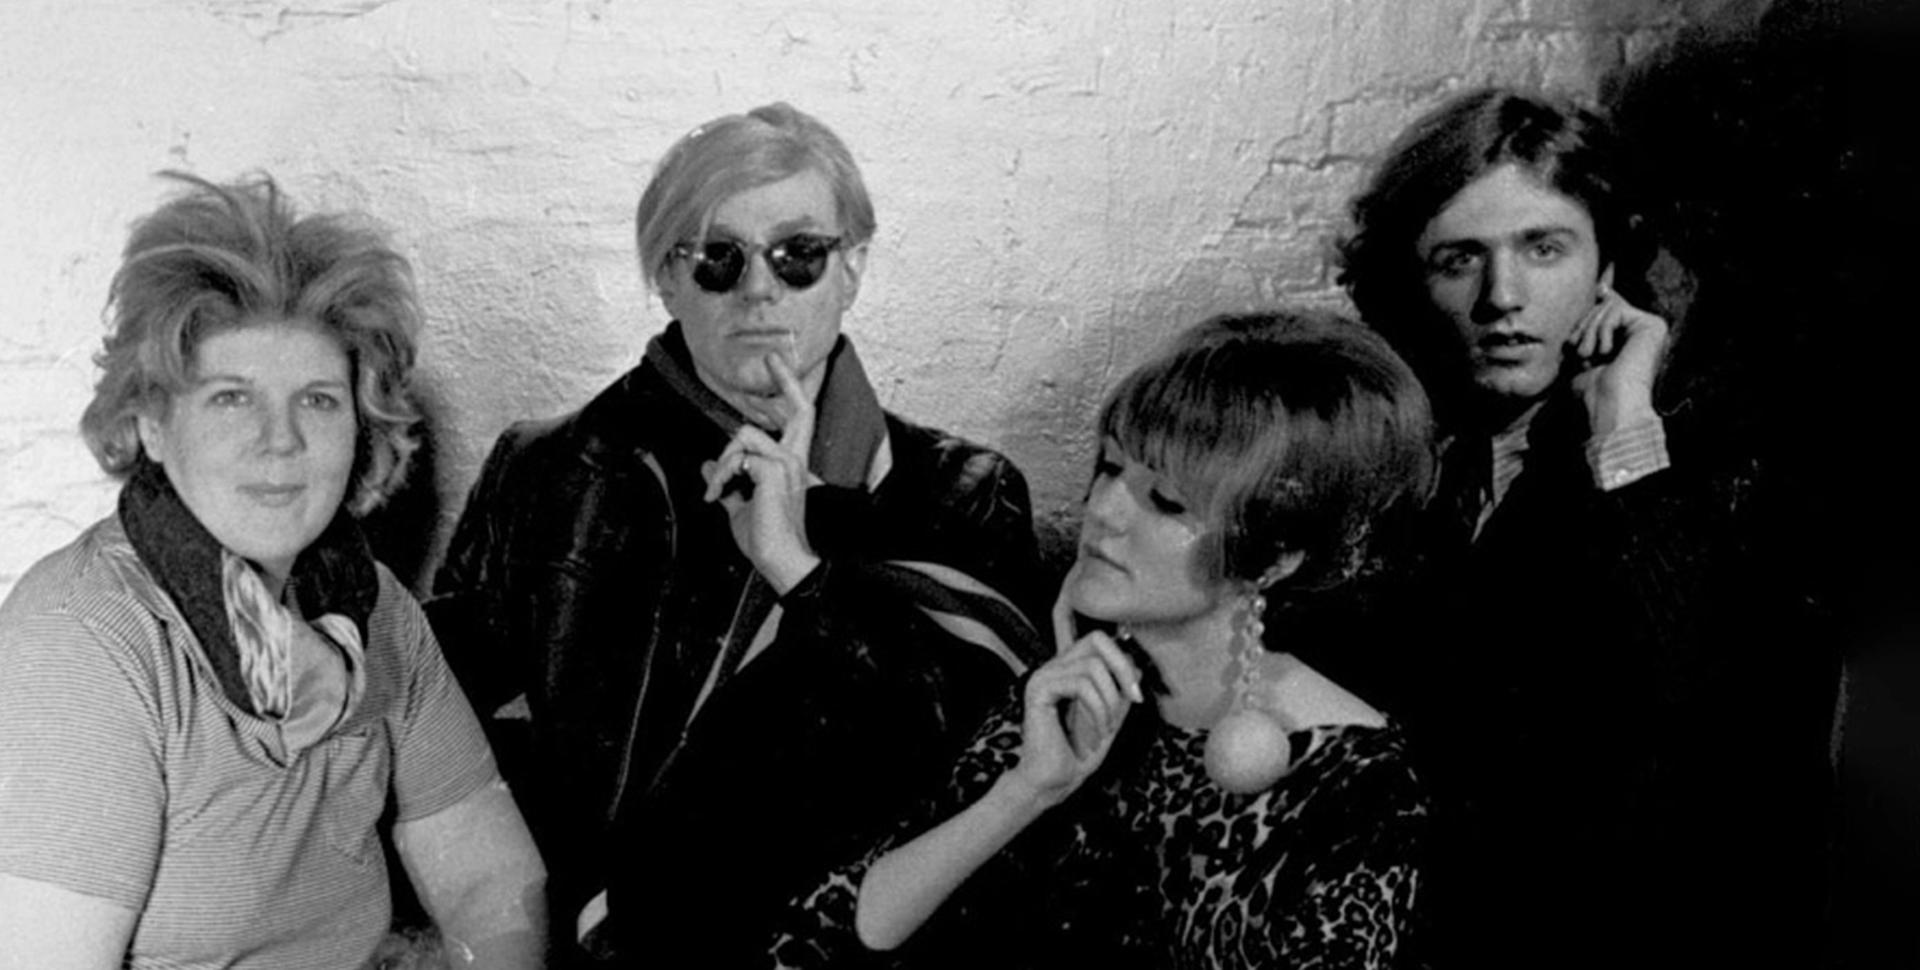 Brigid Berlin (left) and Andy Warhol hang out at The Factory Steve Schapiro